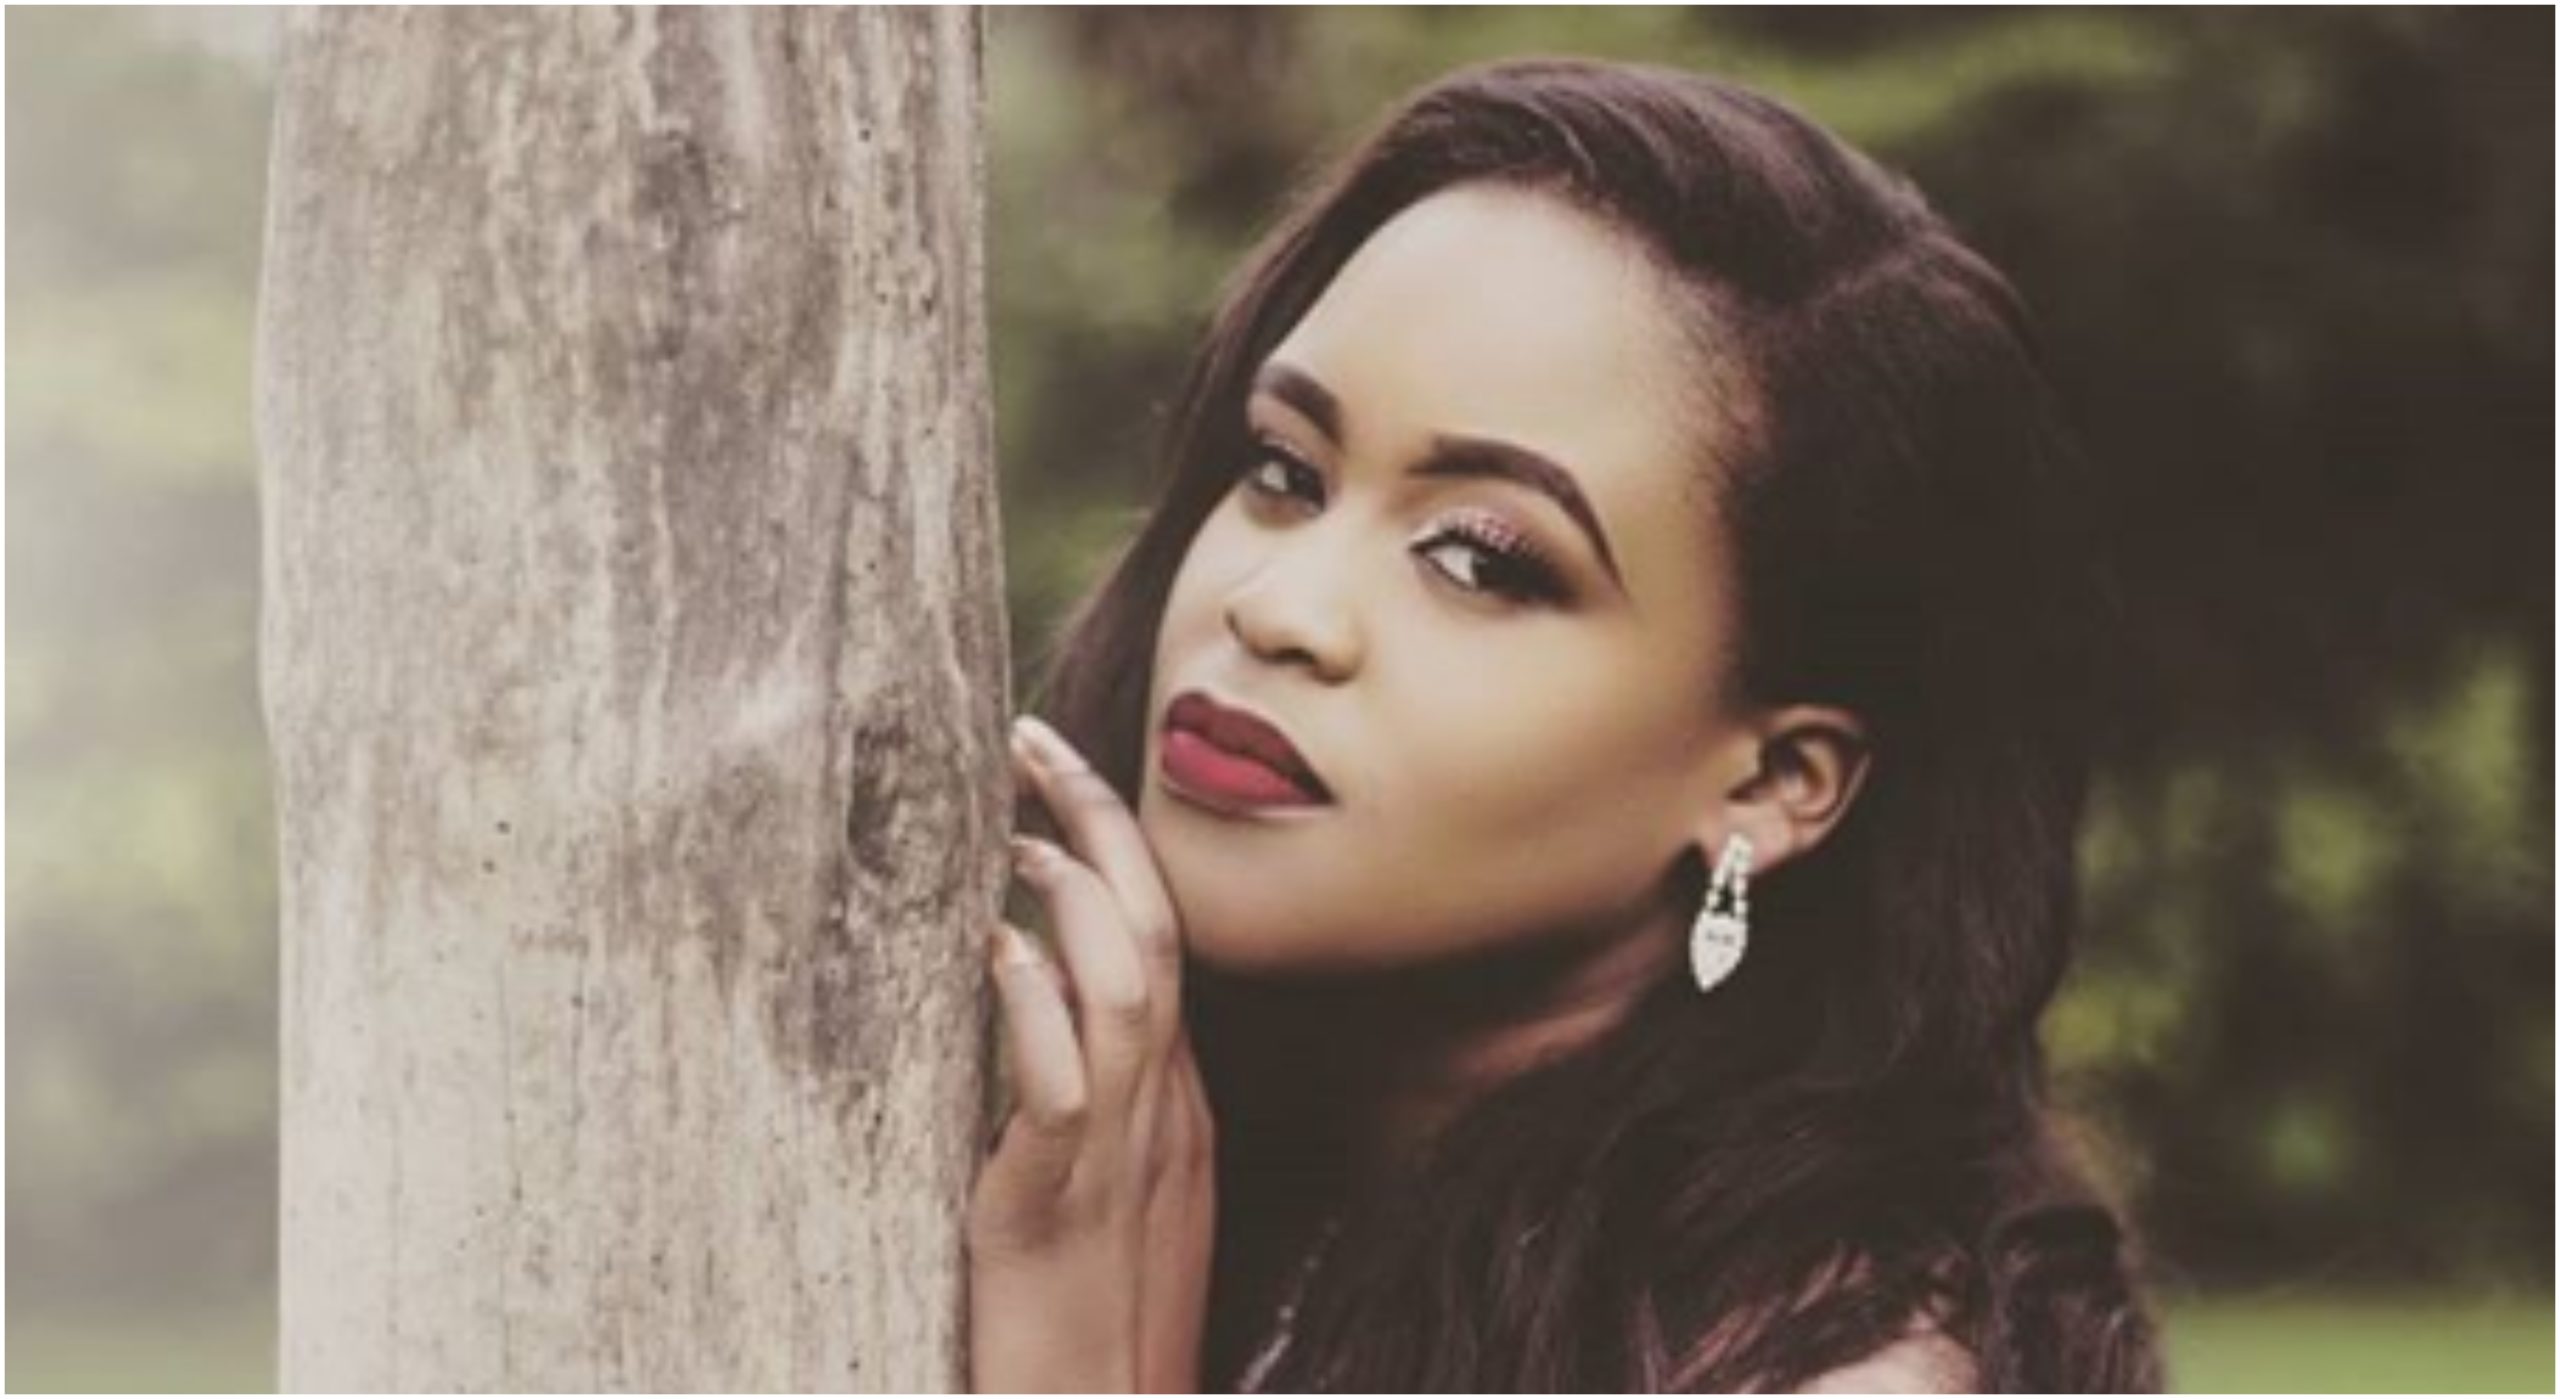 Separated at birth? Meet Kamene Goro’s  doppelgänger who literally bares an uncanny resemblance to the popular radio host (Photo)